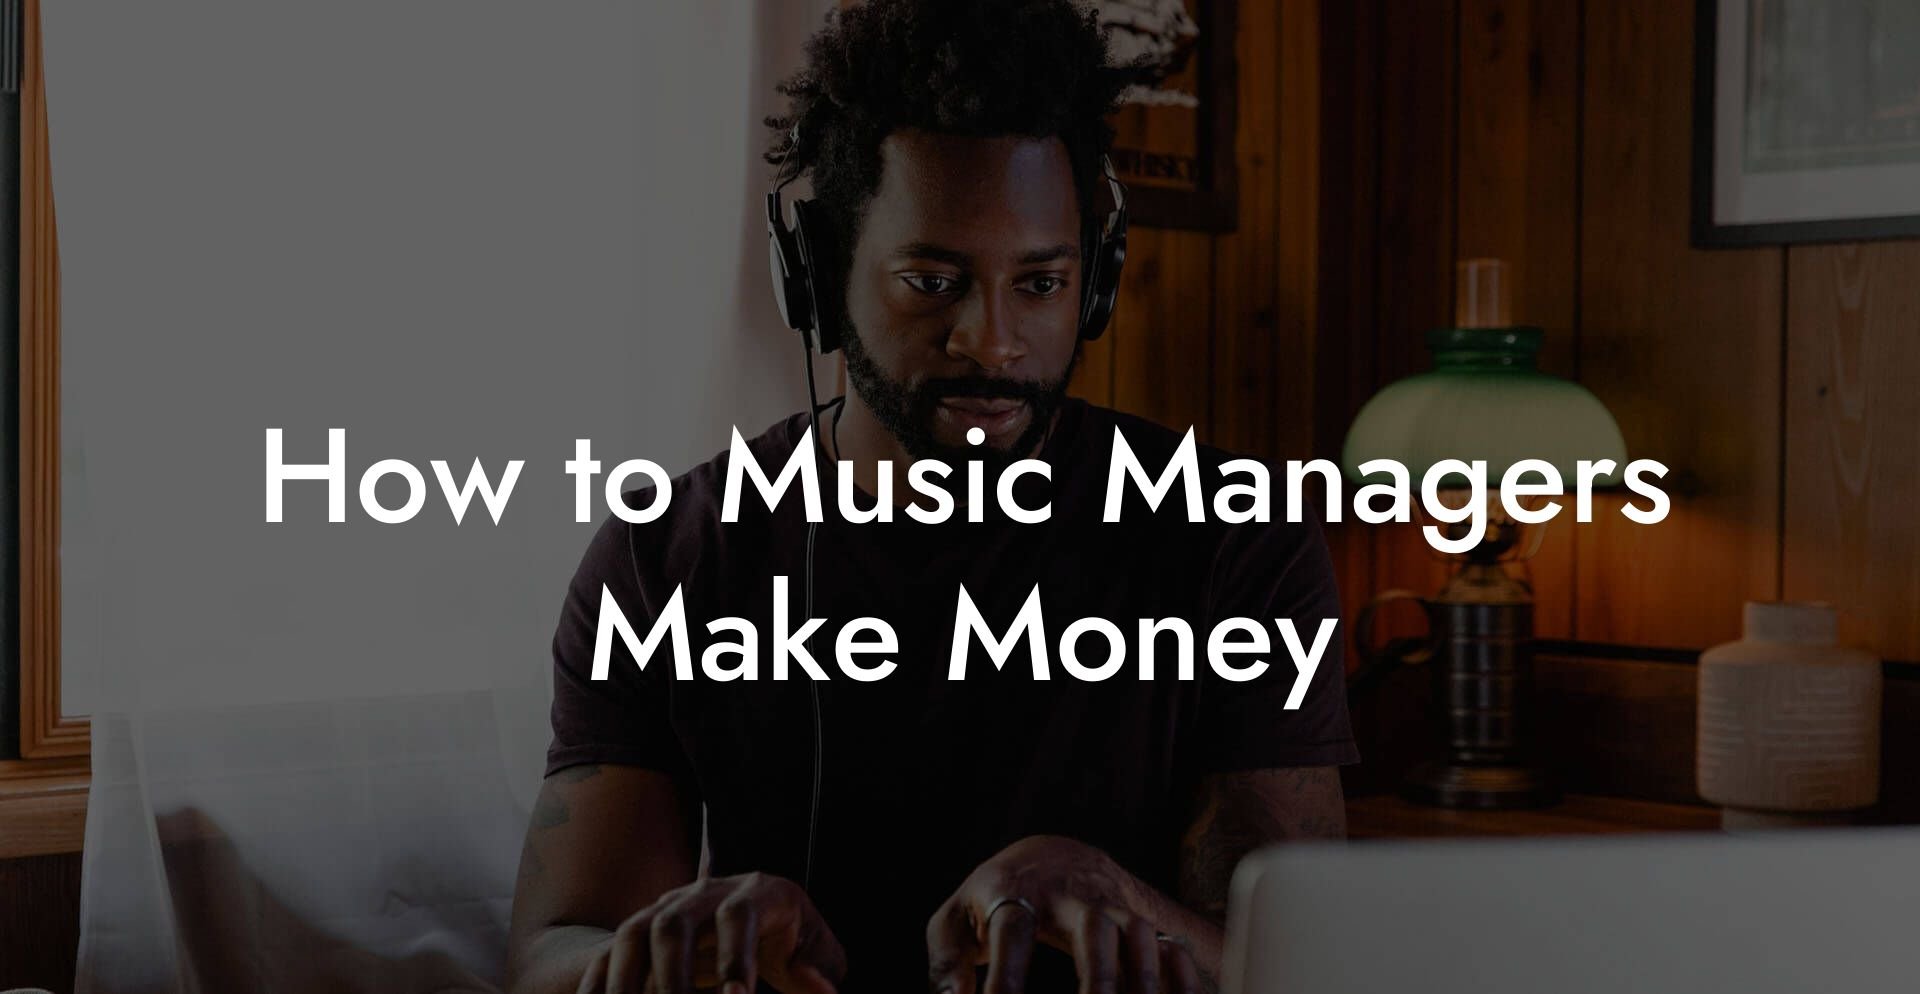 How to Music Managers Make Money